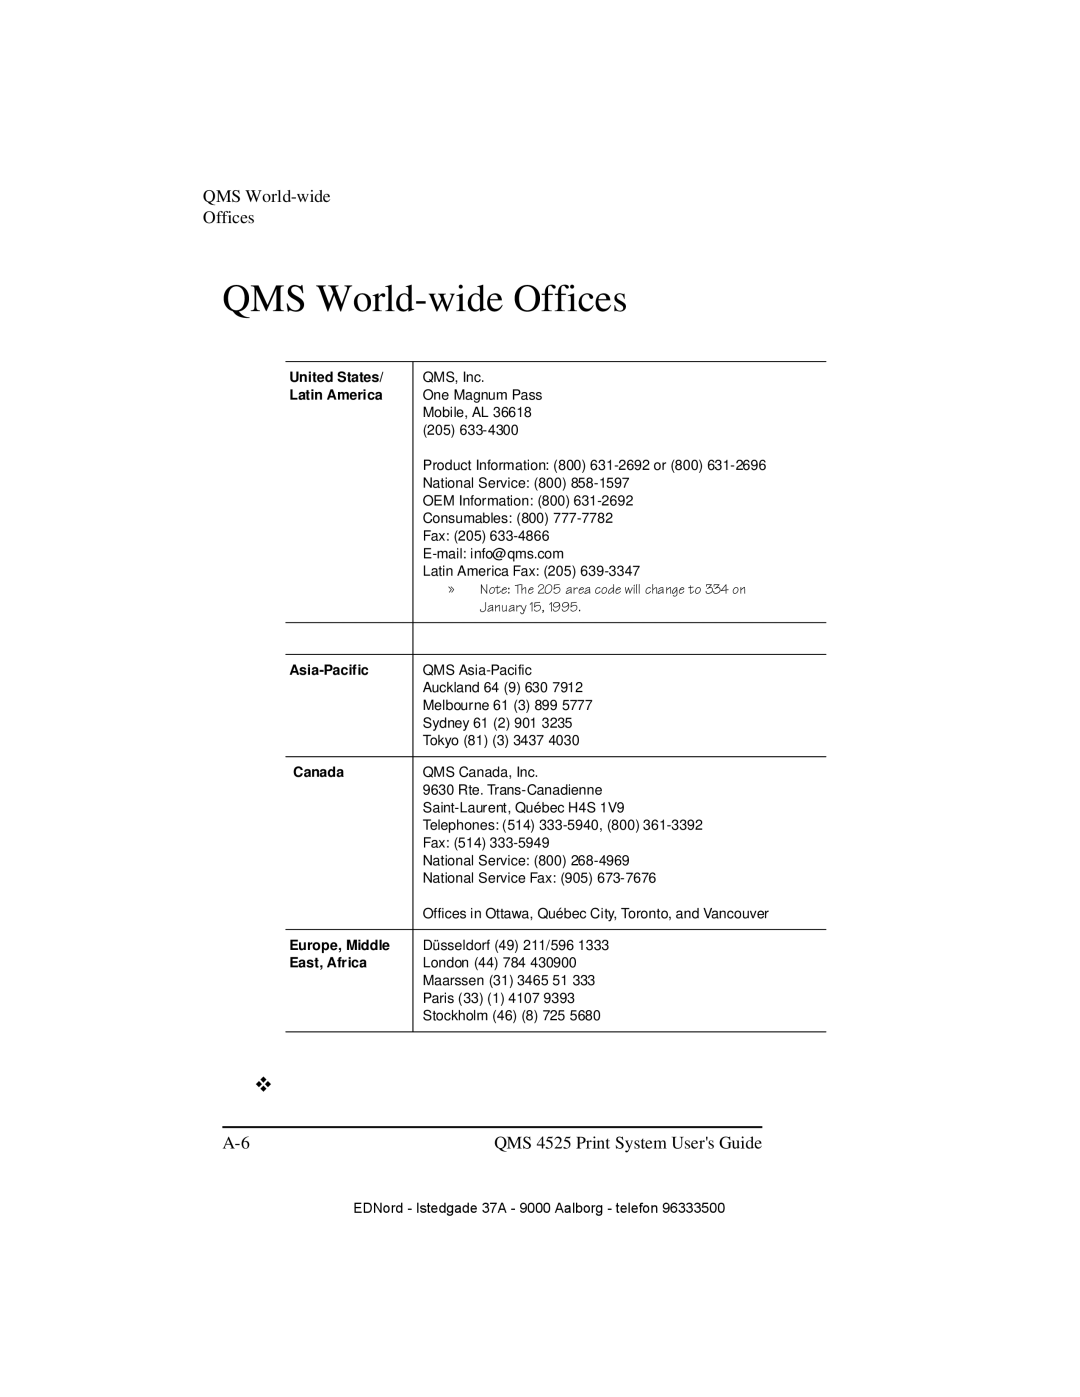 IBM manual QMS World-wide Offices, QMS 4525 Print System Users Guide, United States, Latin America, Asia-Pacific, Canada 